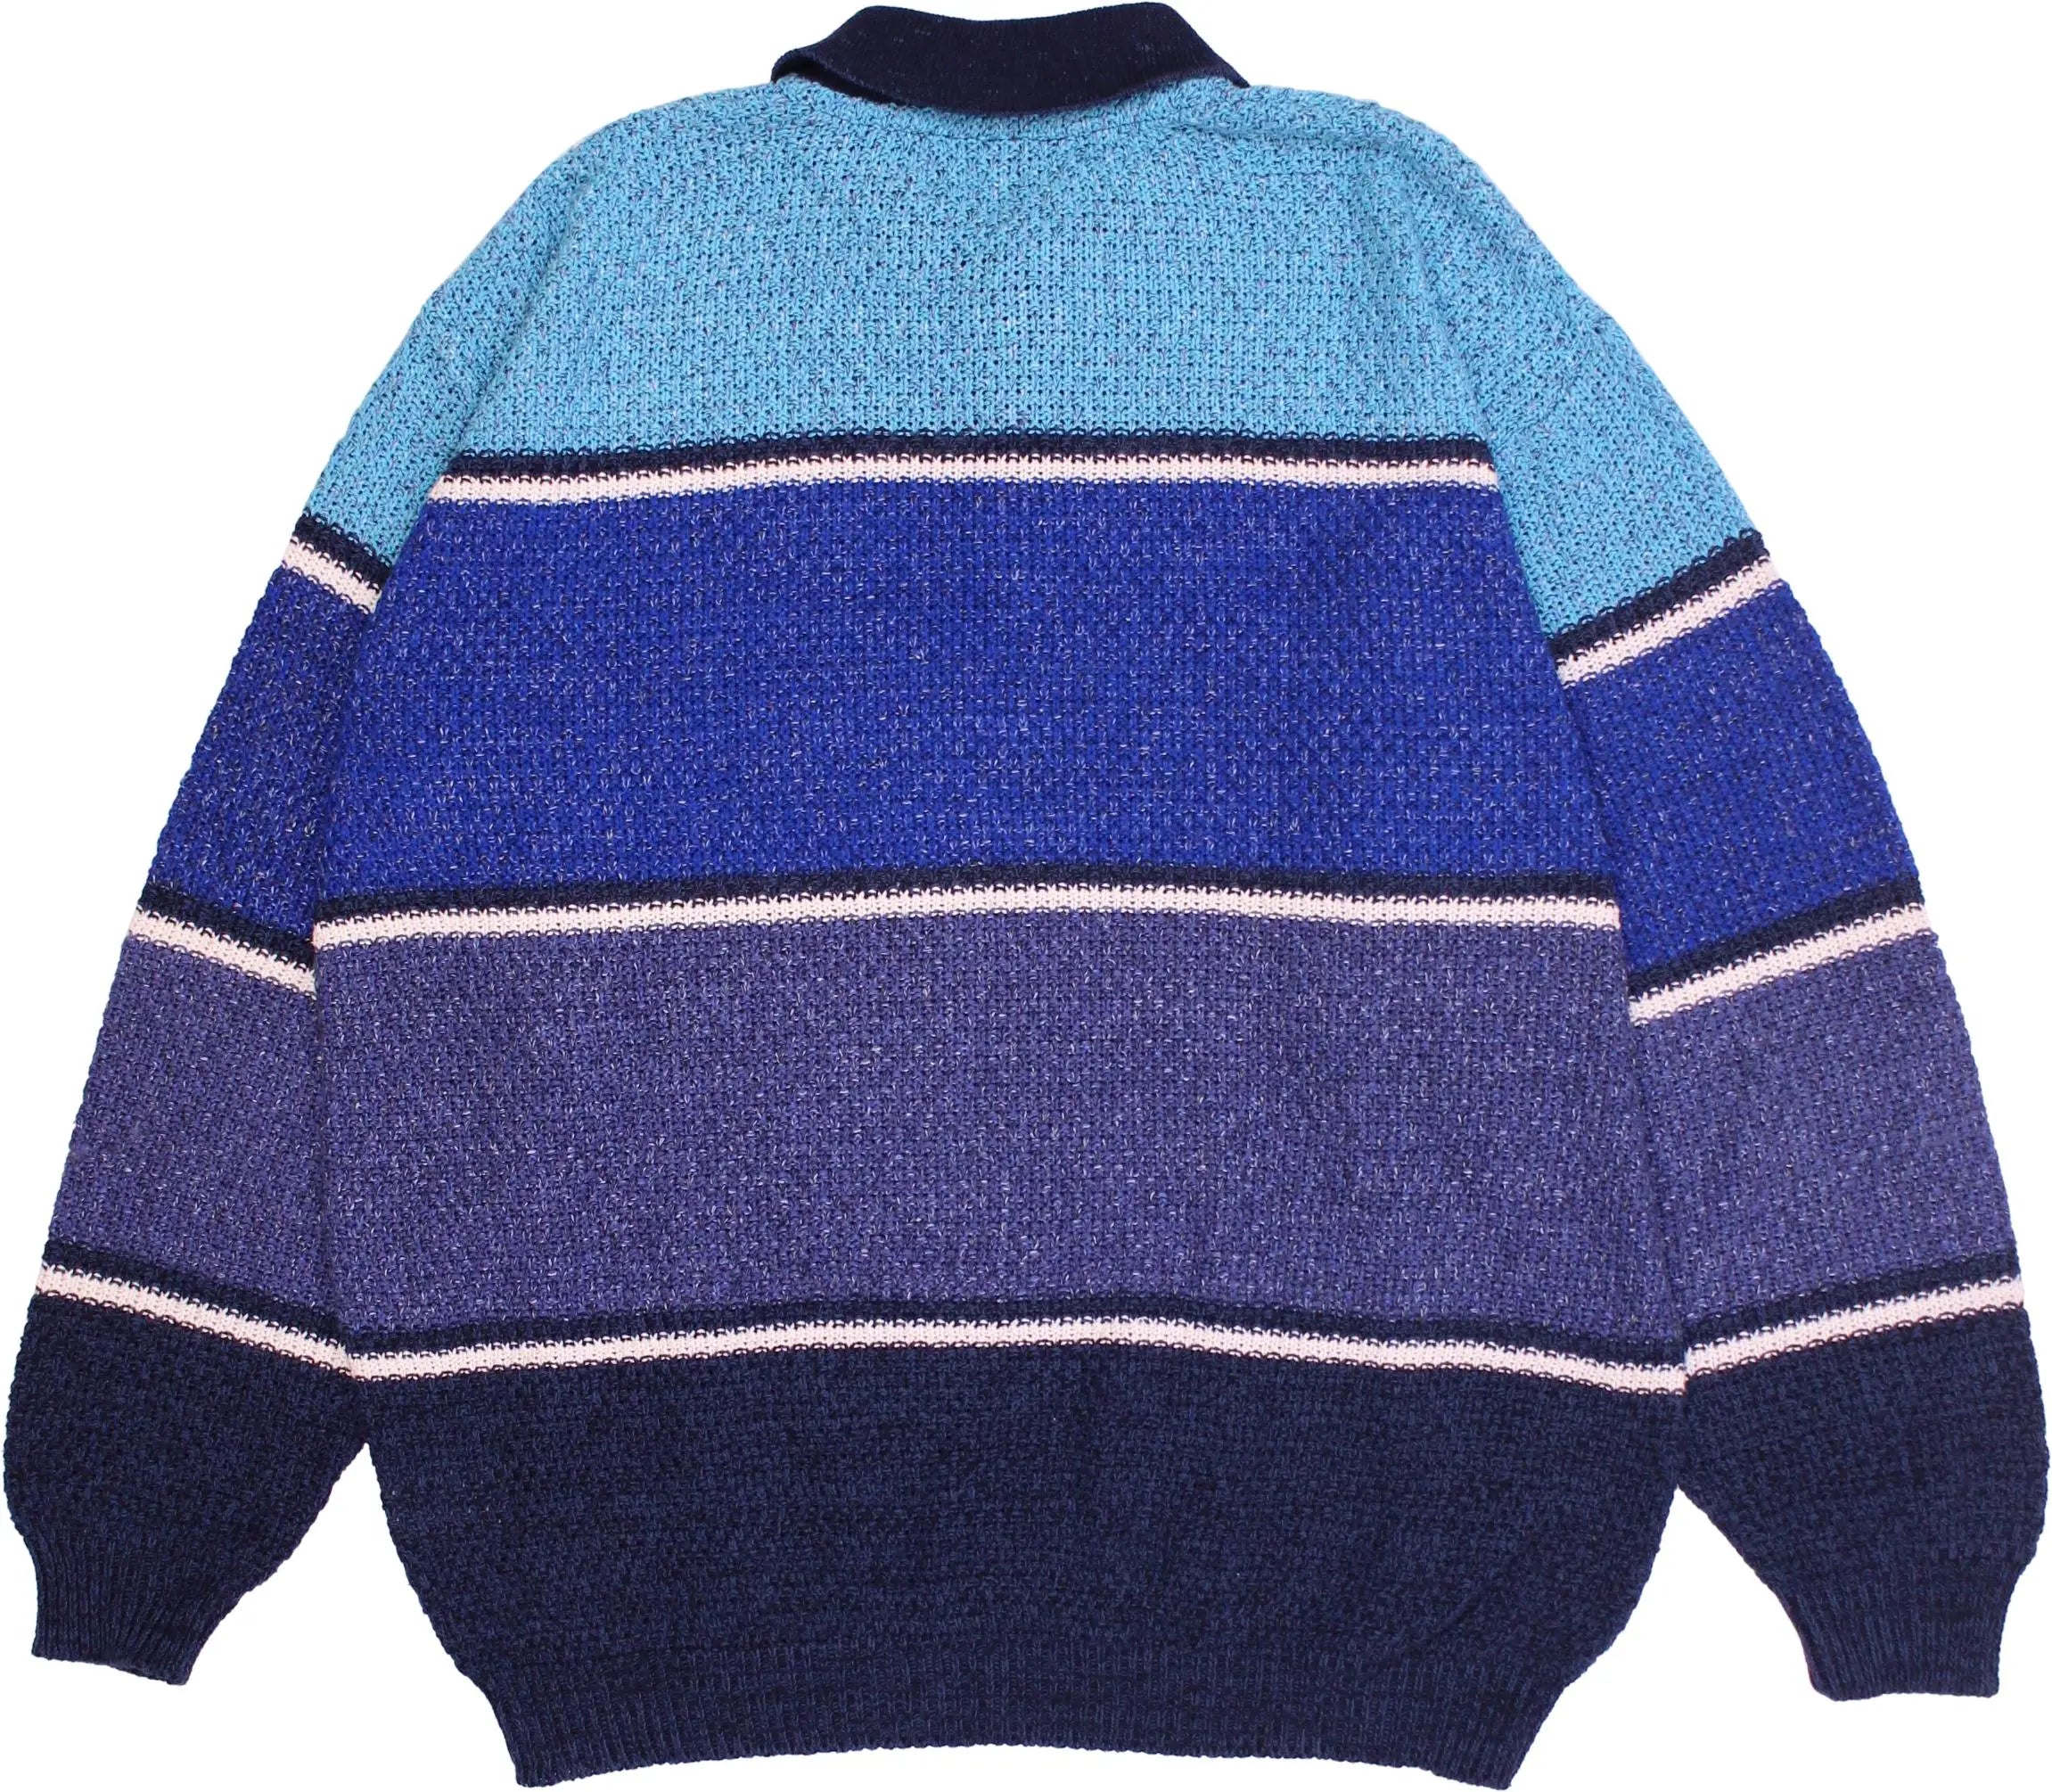 World of Man's Fashion - 80s/90s Knitted Jumper- ThriftTale.com - Vintage and second handclothing